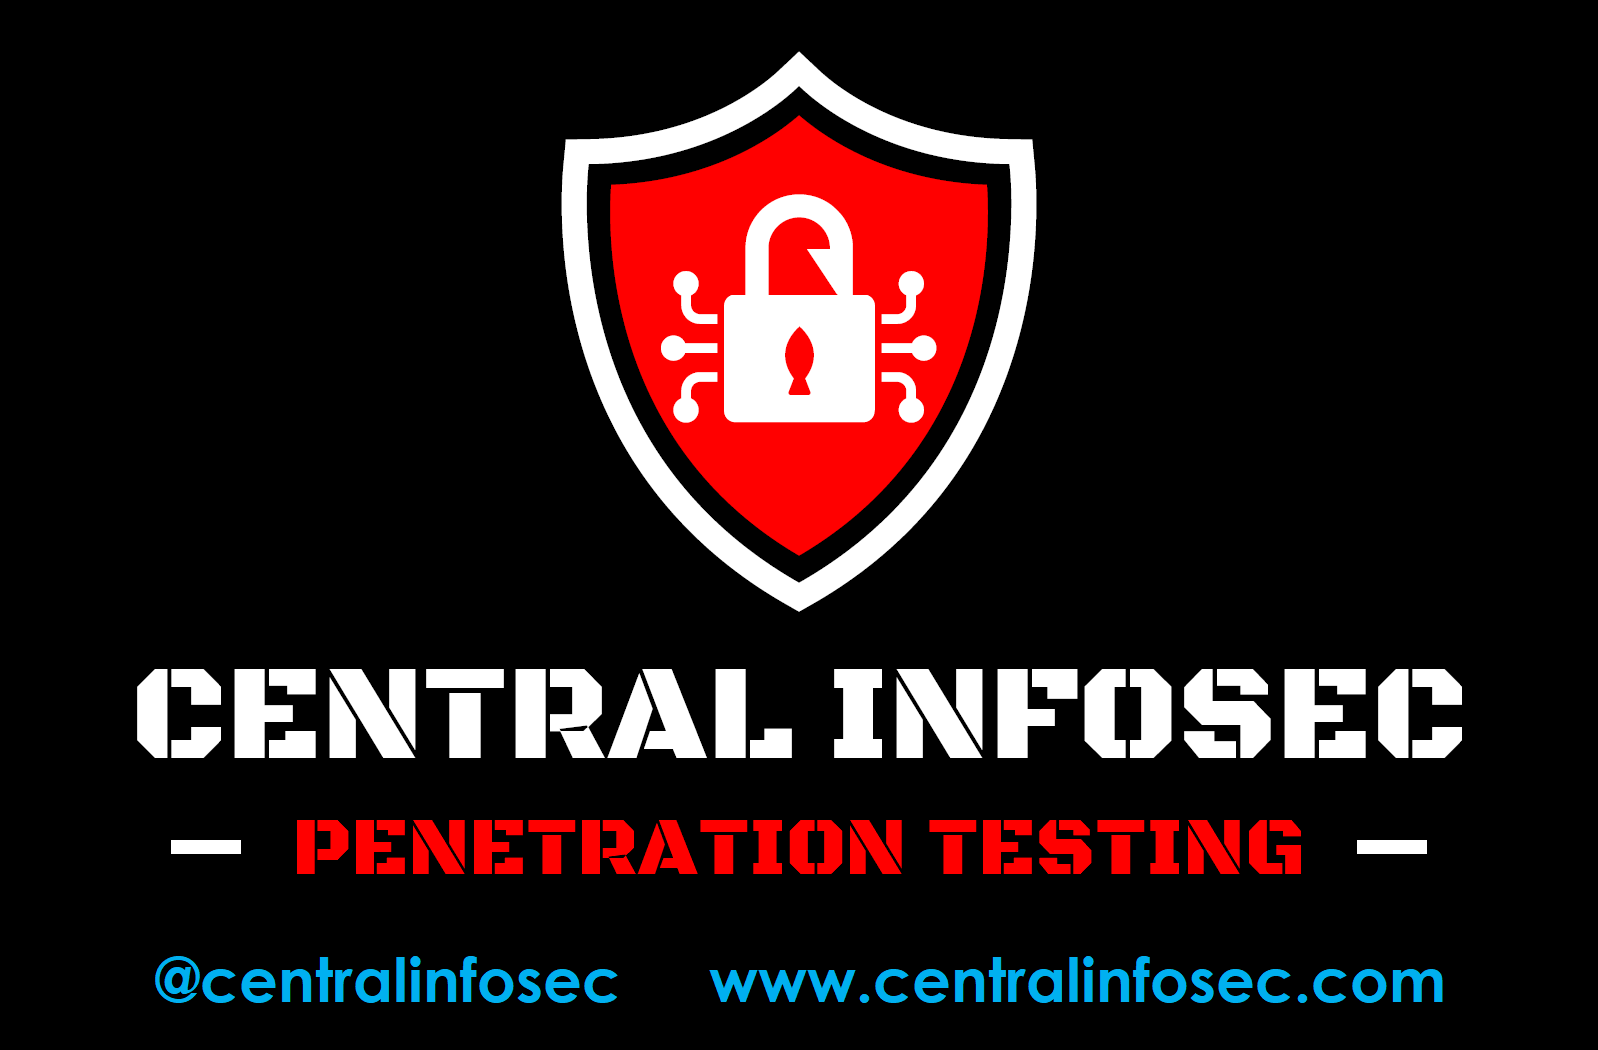 Central InfoSec Best Pentesting Firm - Top Rated Red Team Companies